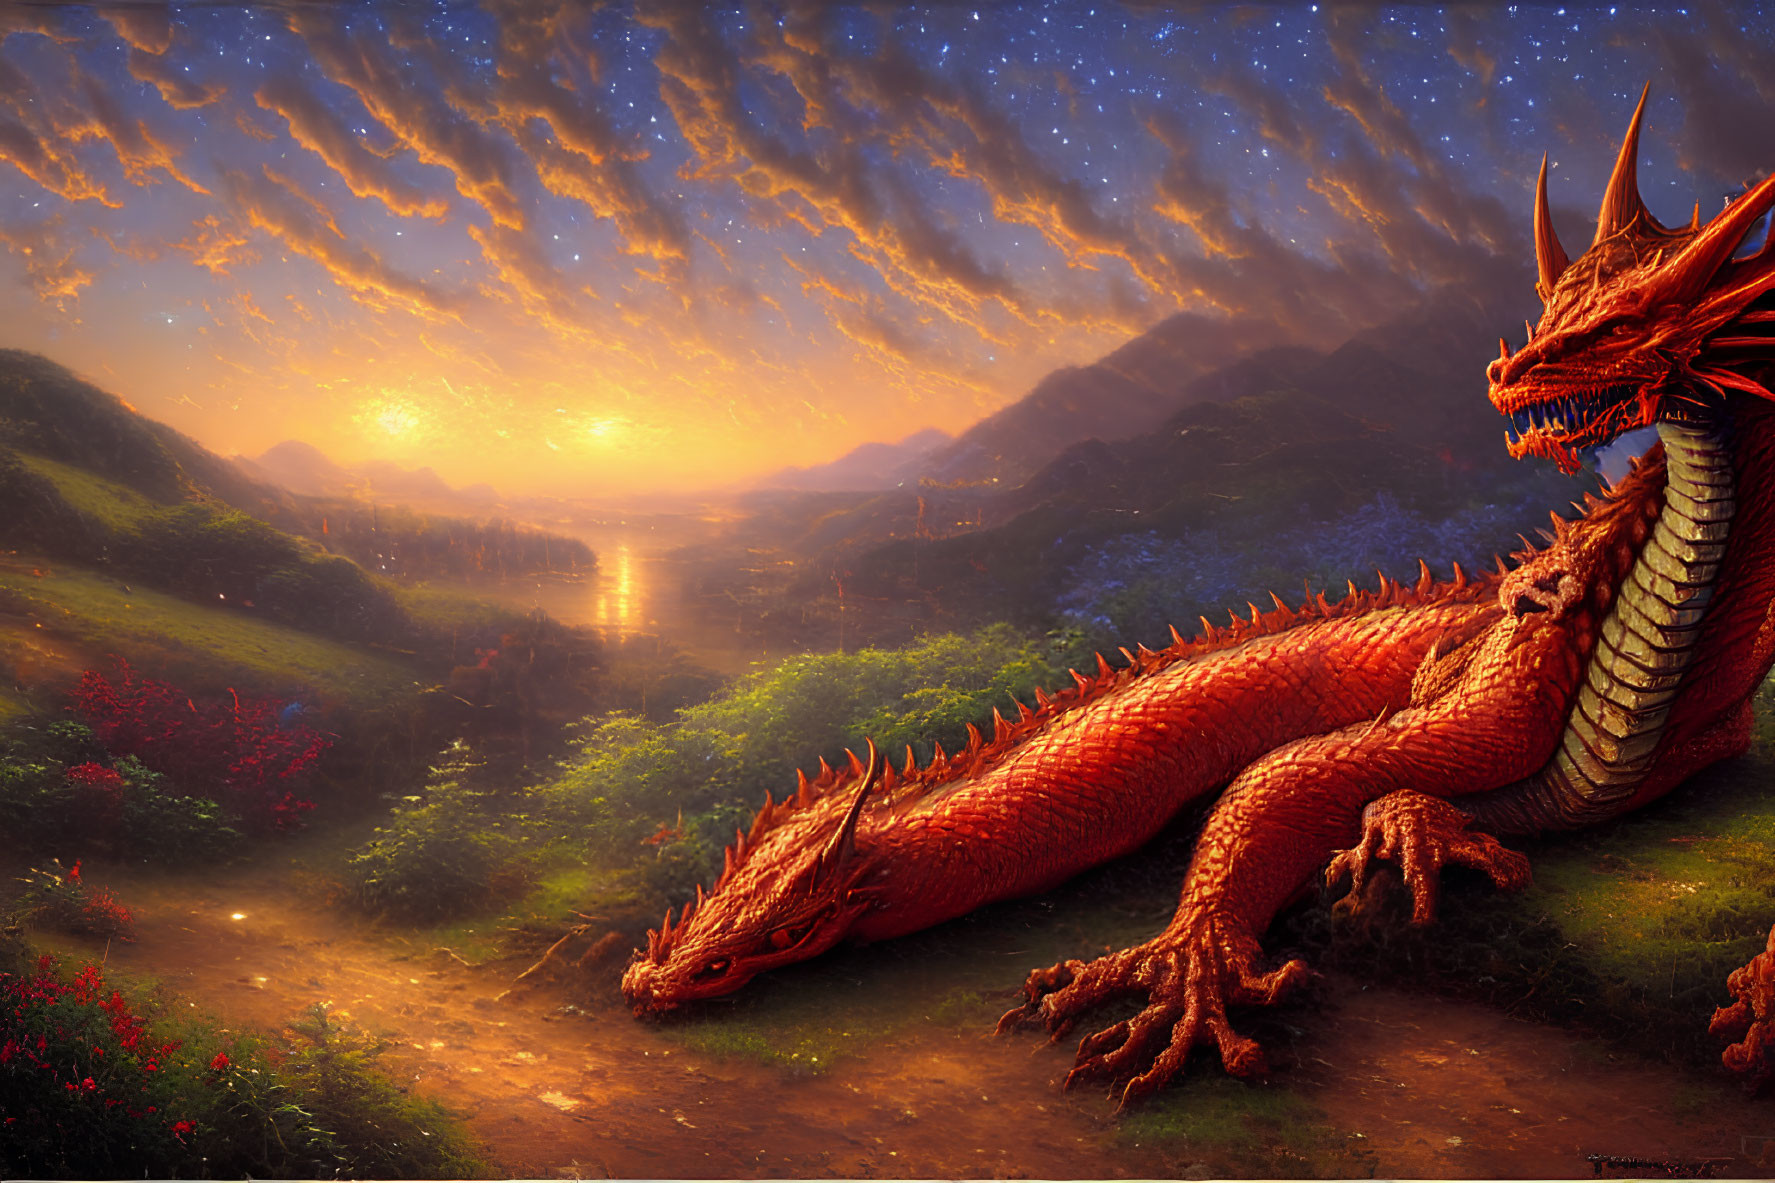 Majestic red dragon on mountain path at sunrise overlooking valley